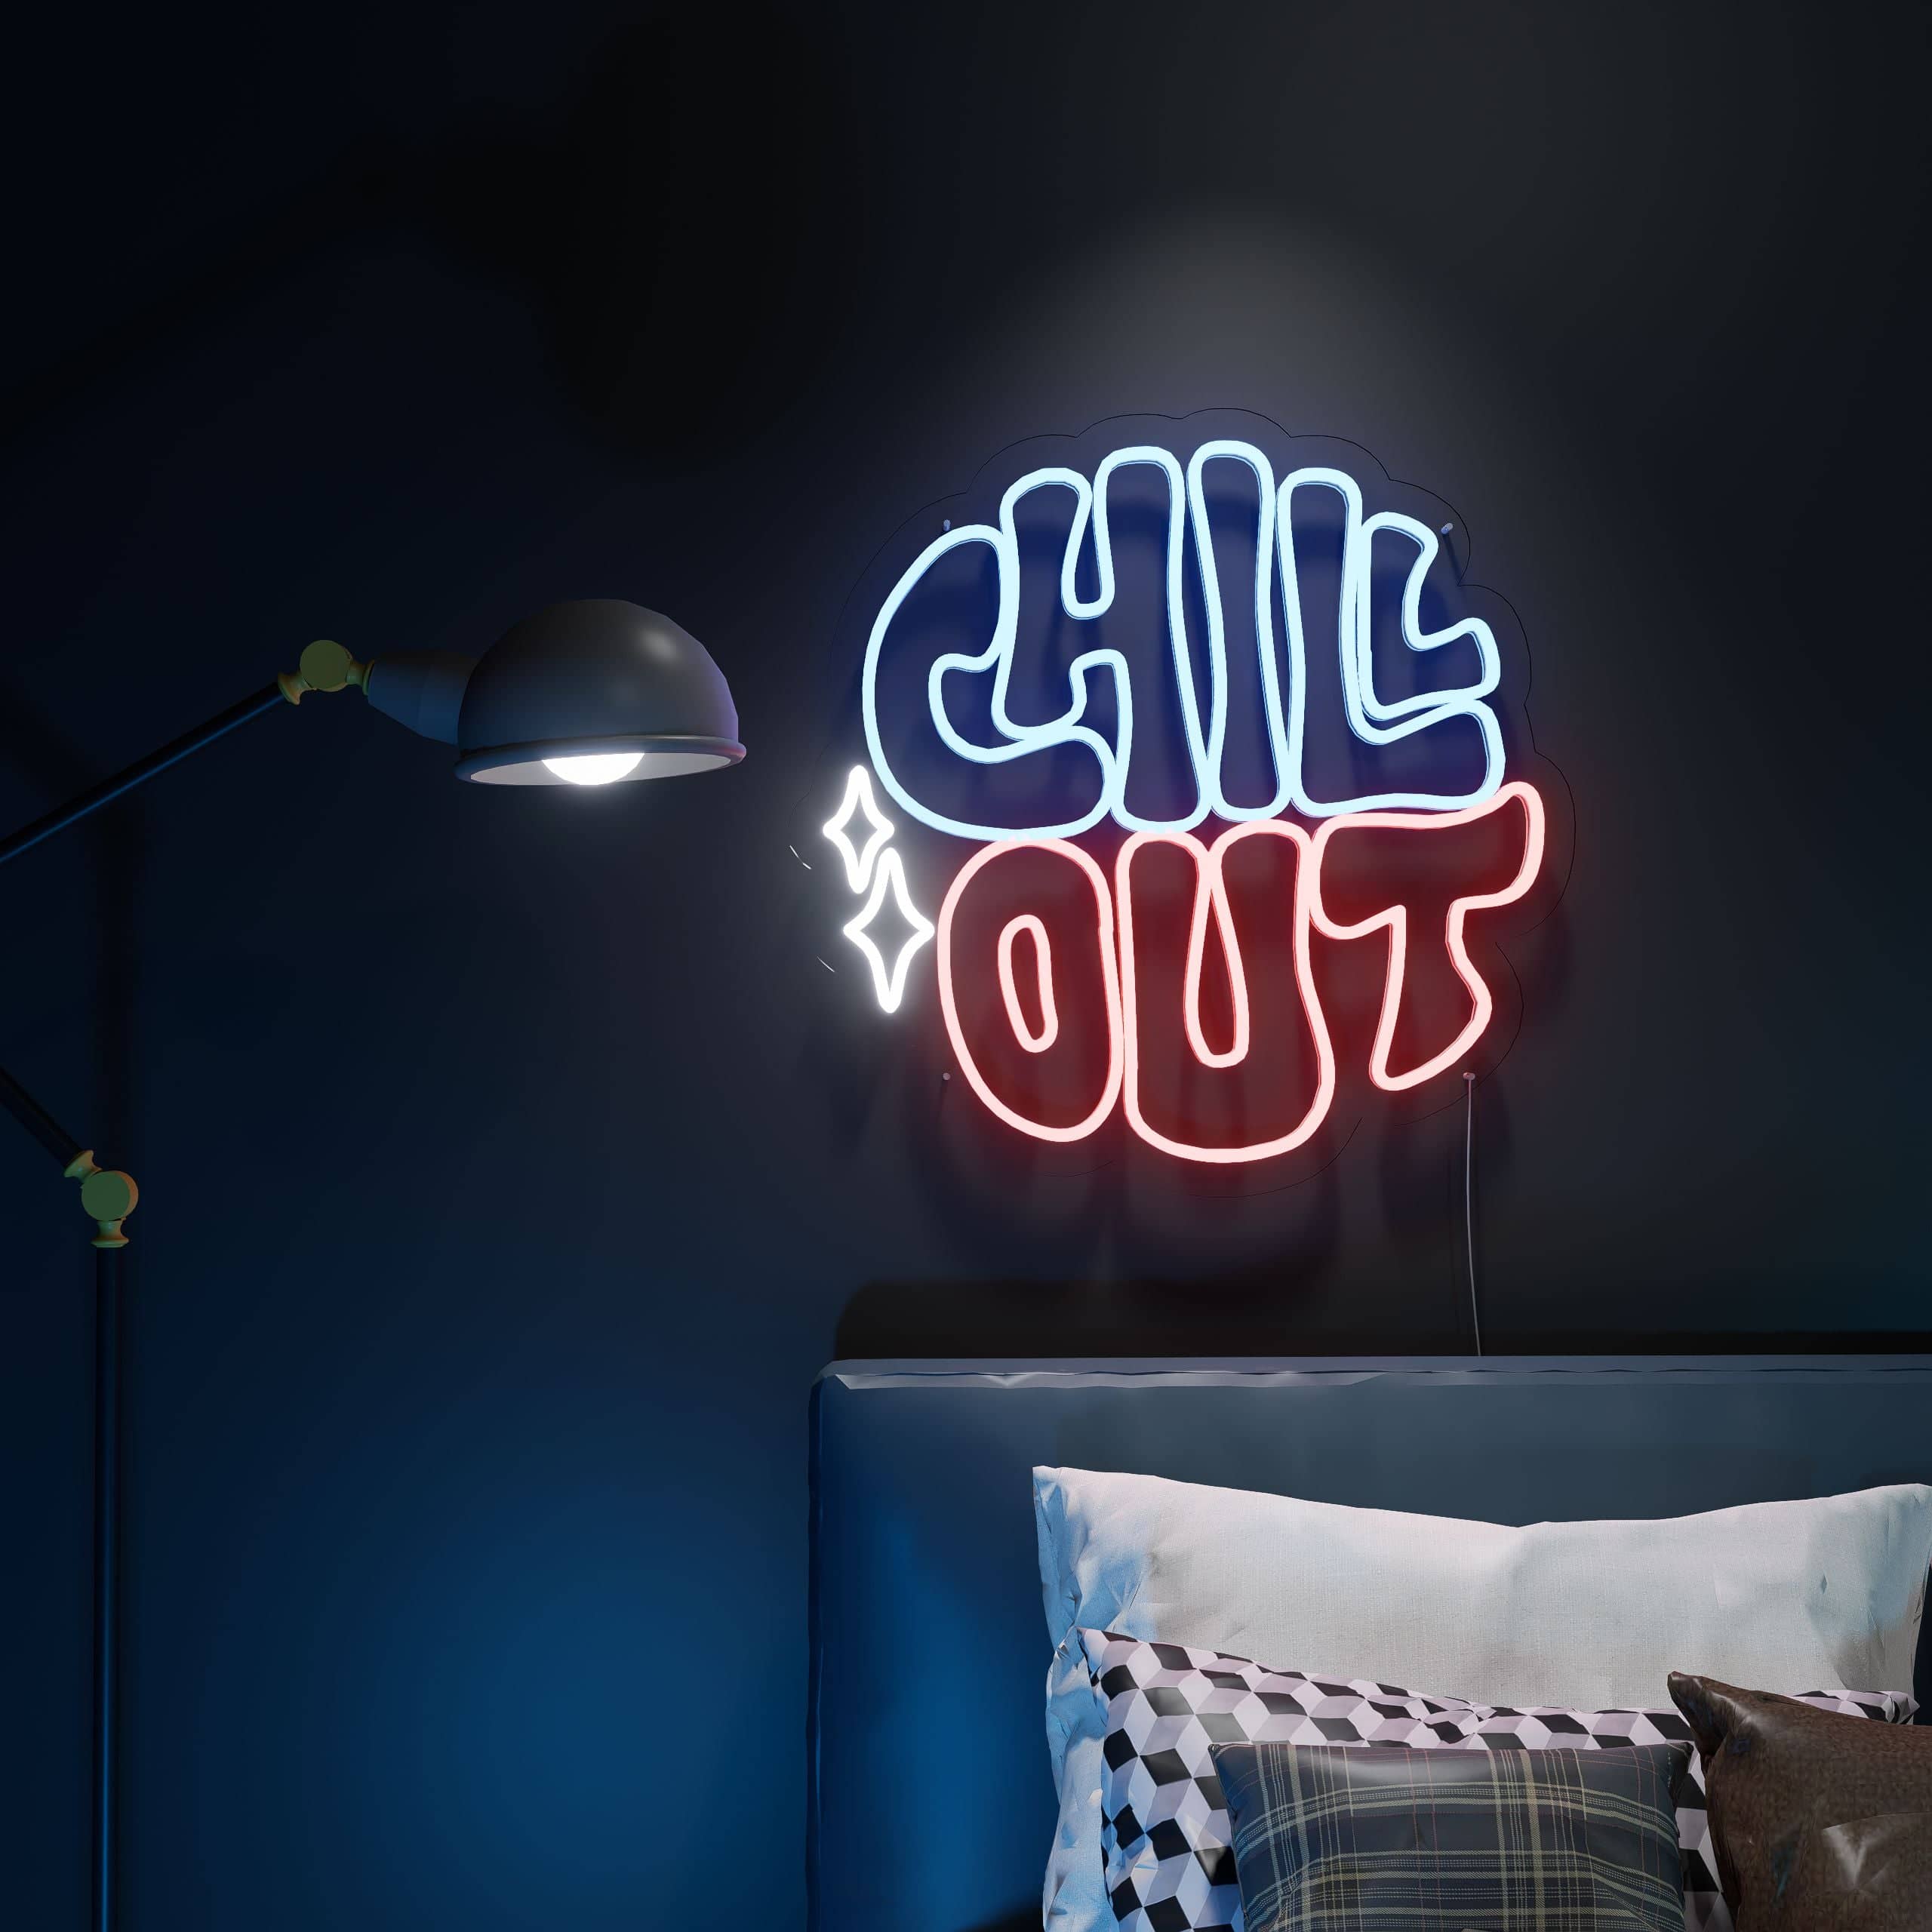 rest-and-recharge-neon-sign-lite